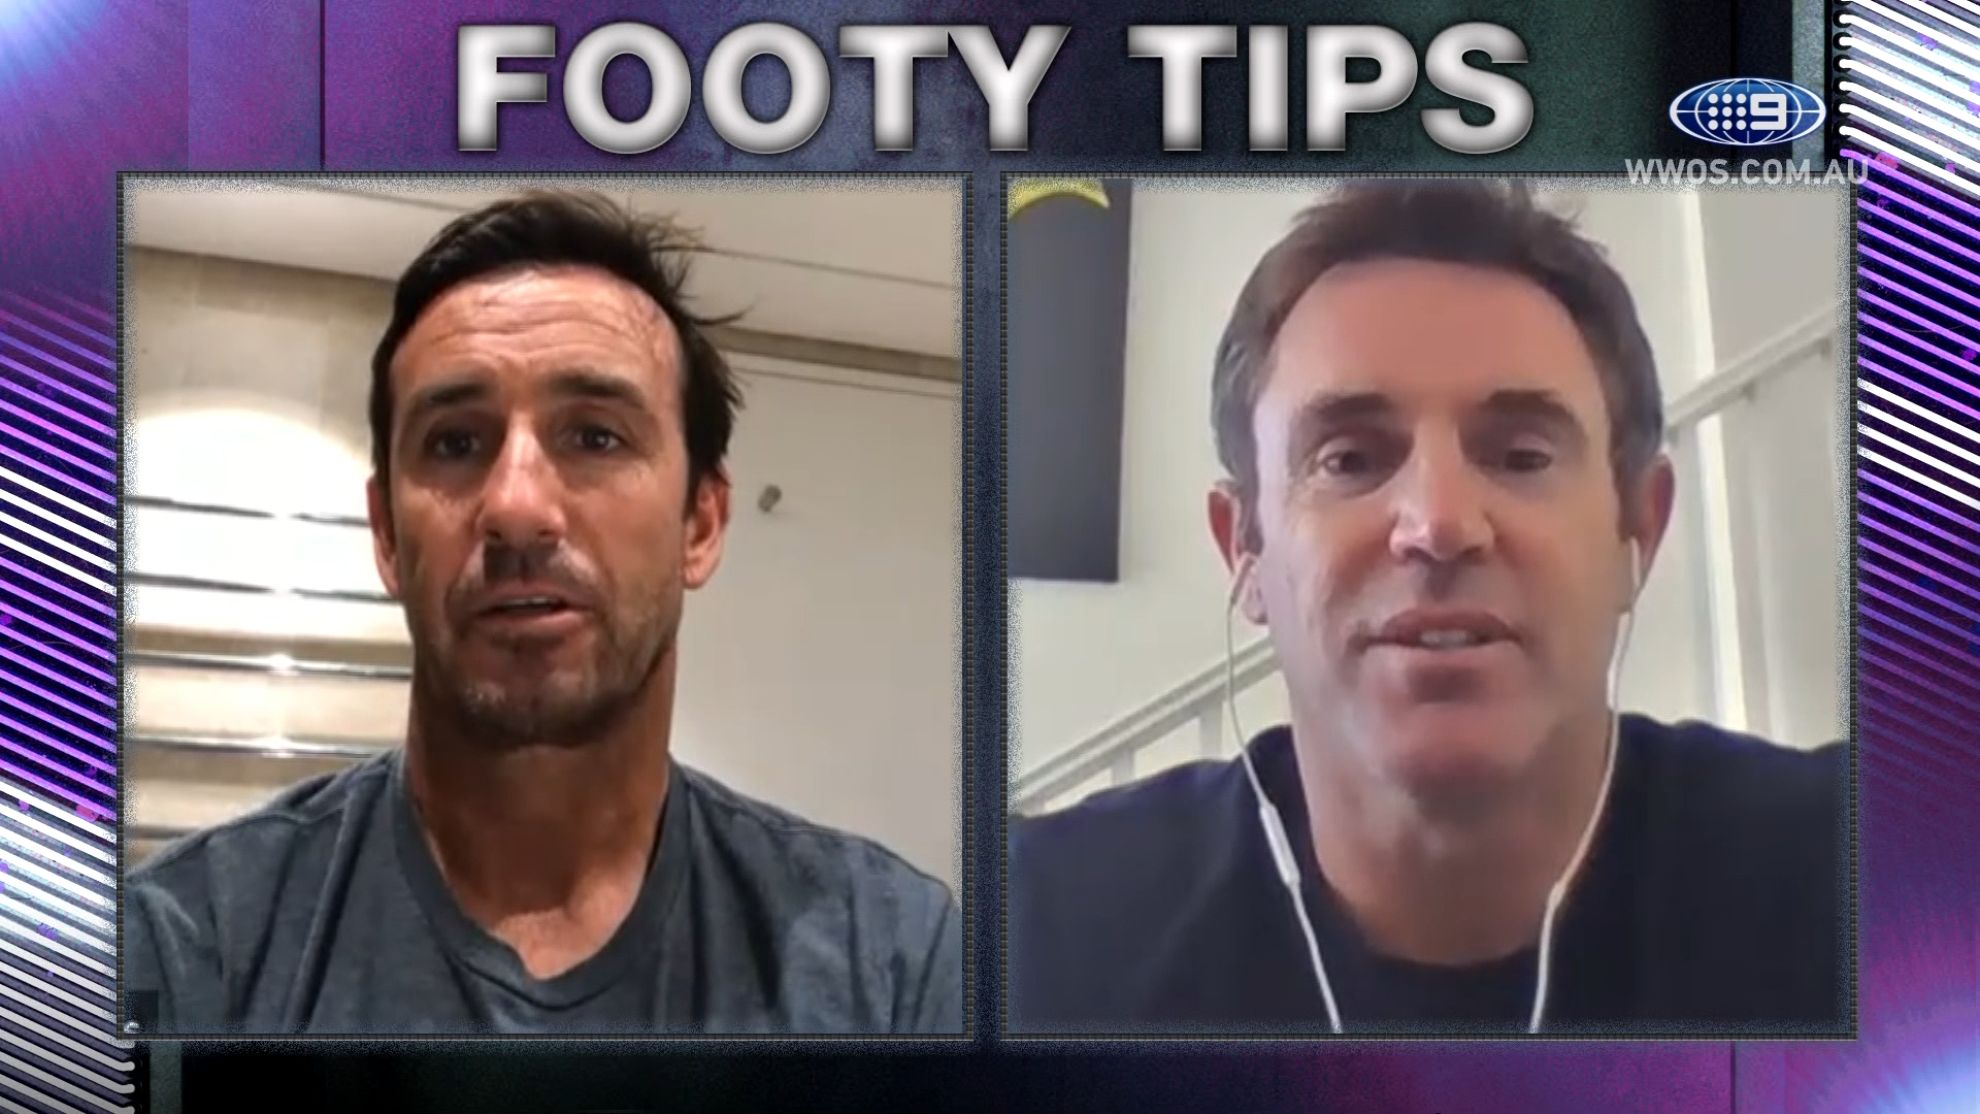 NRL week one finals: Andrew Johns, Brad Fittler and Nine's experts give their predictions